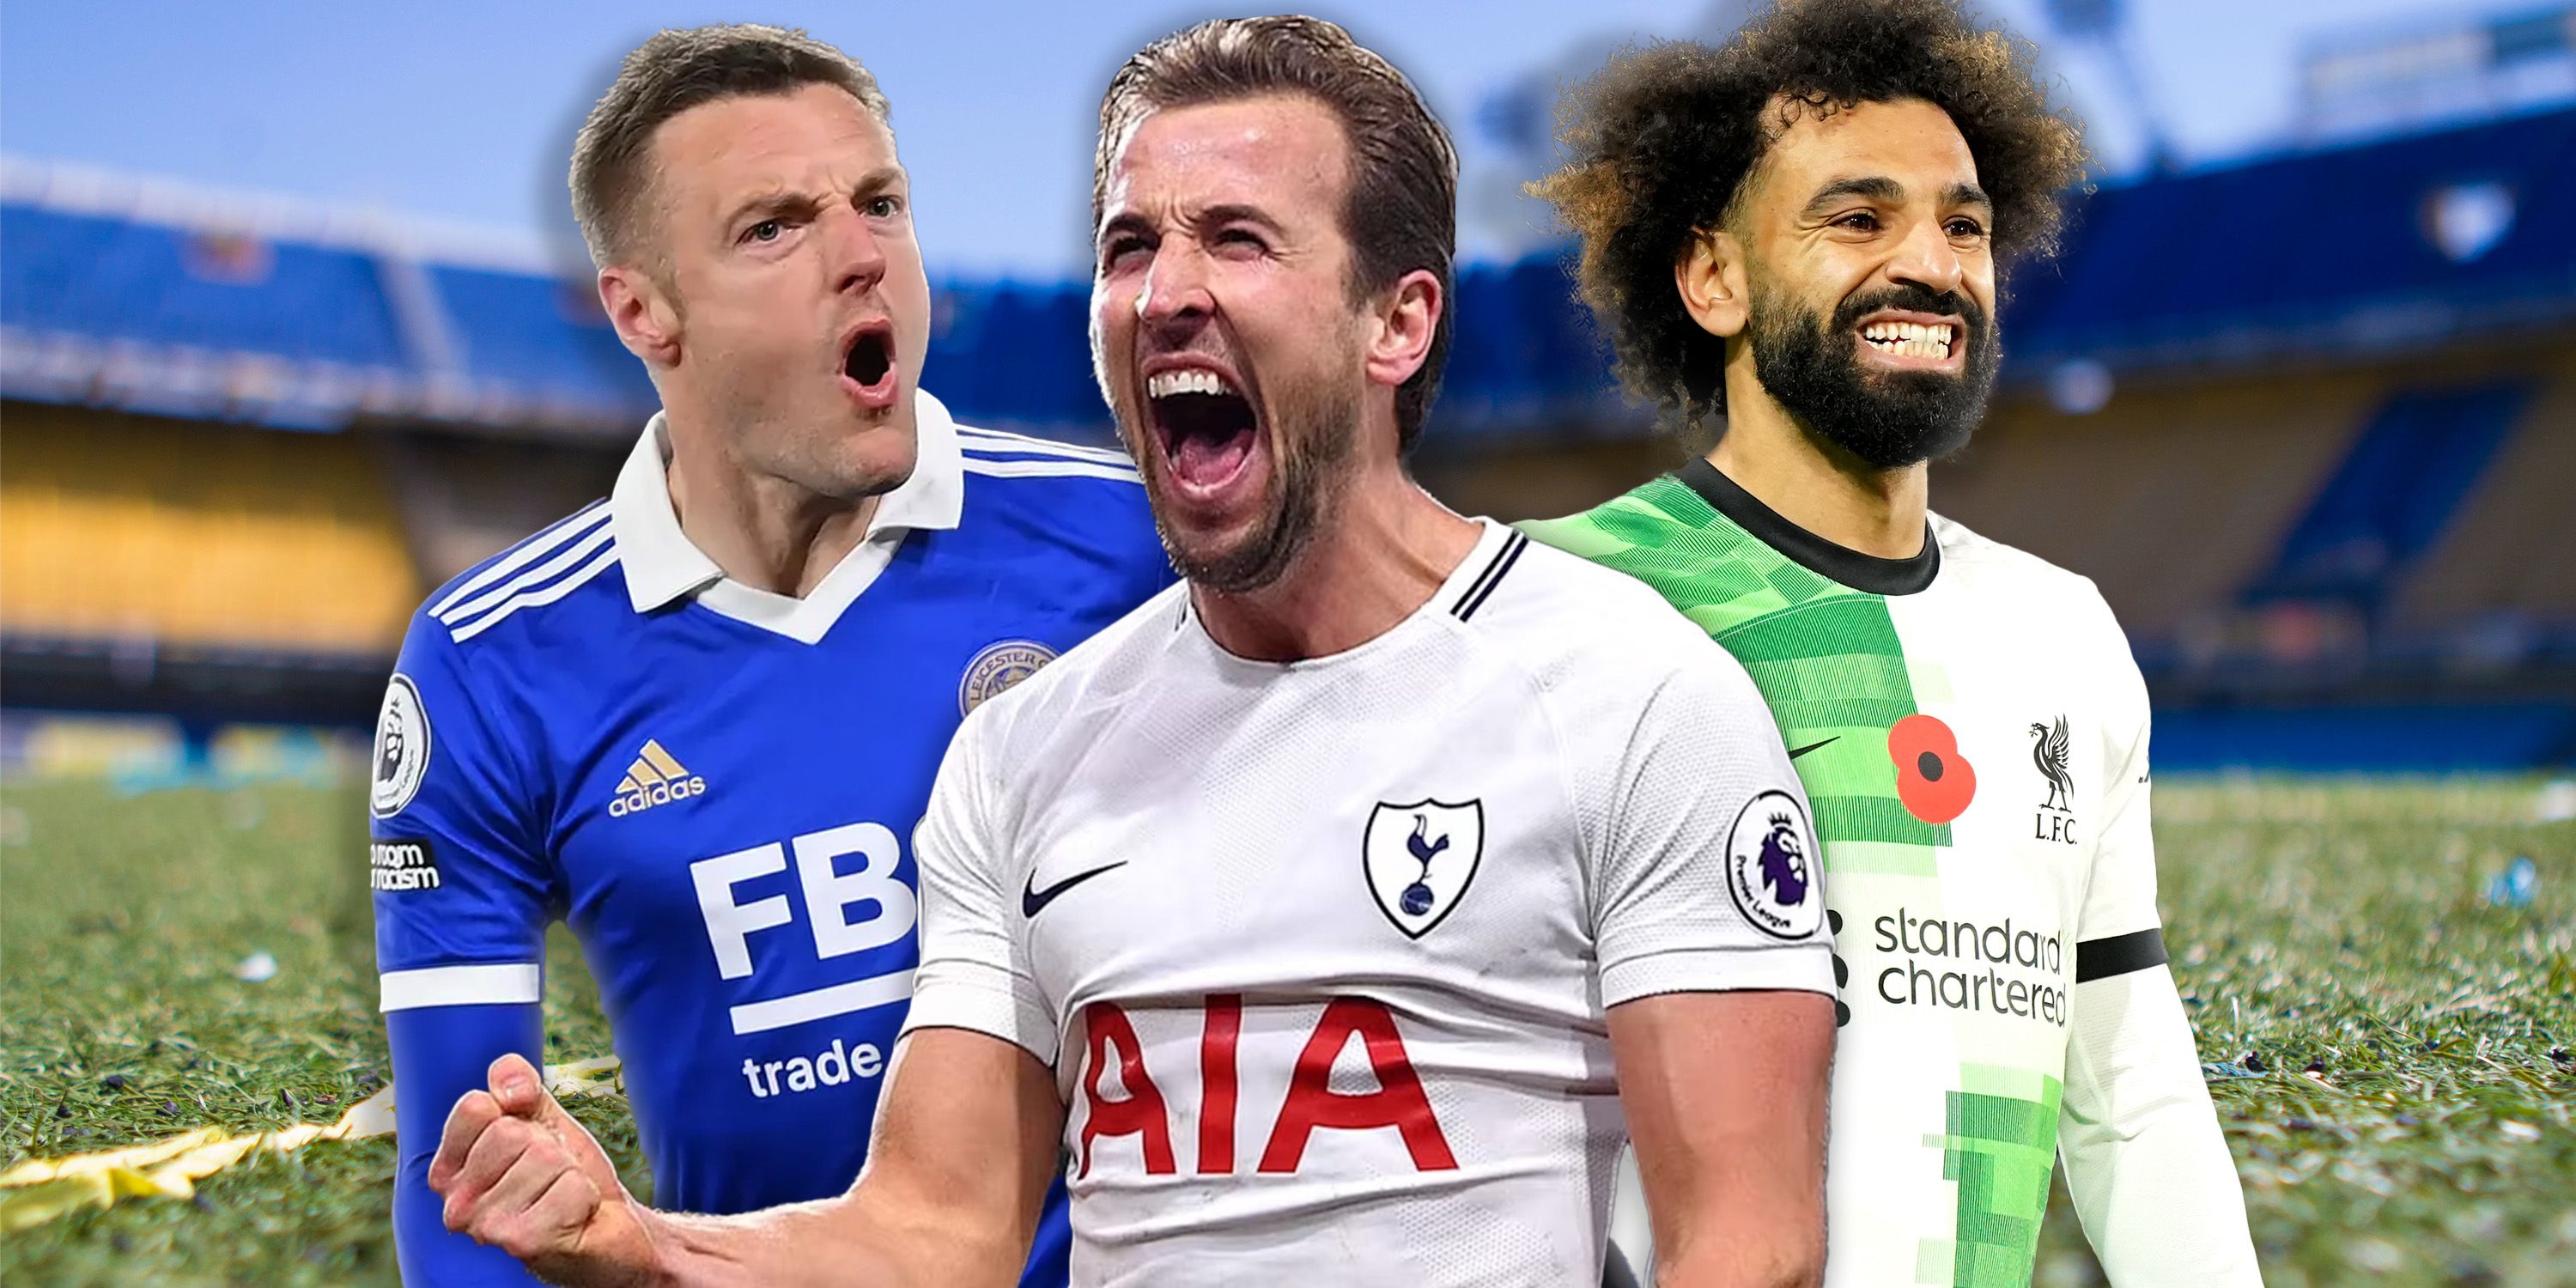 Premier League collage featuring Jamie Vardy, Harry Kane and Mohamed Salah.